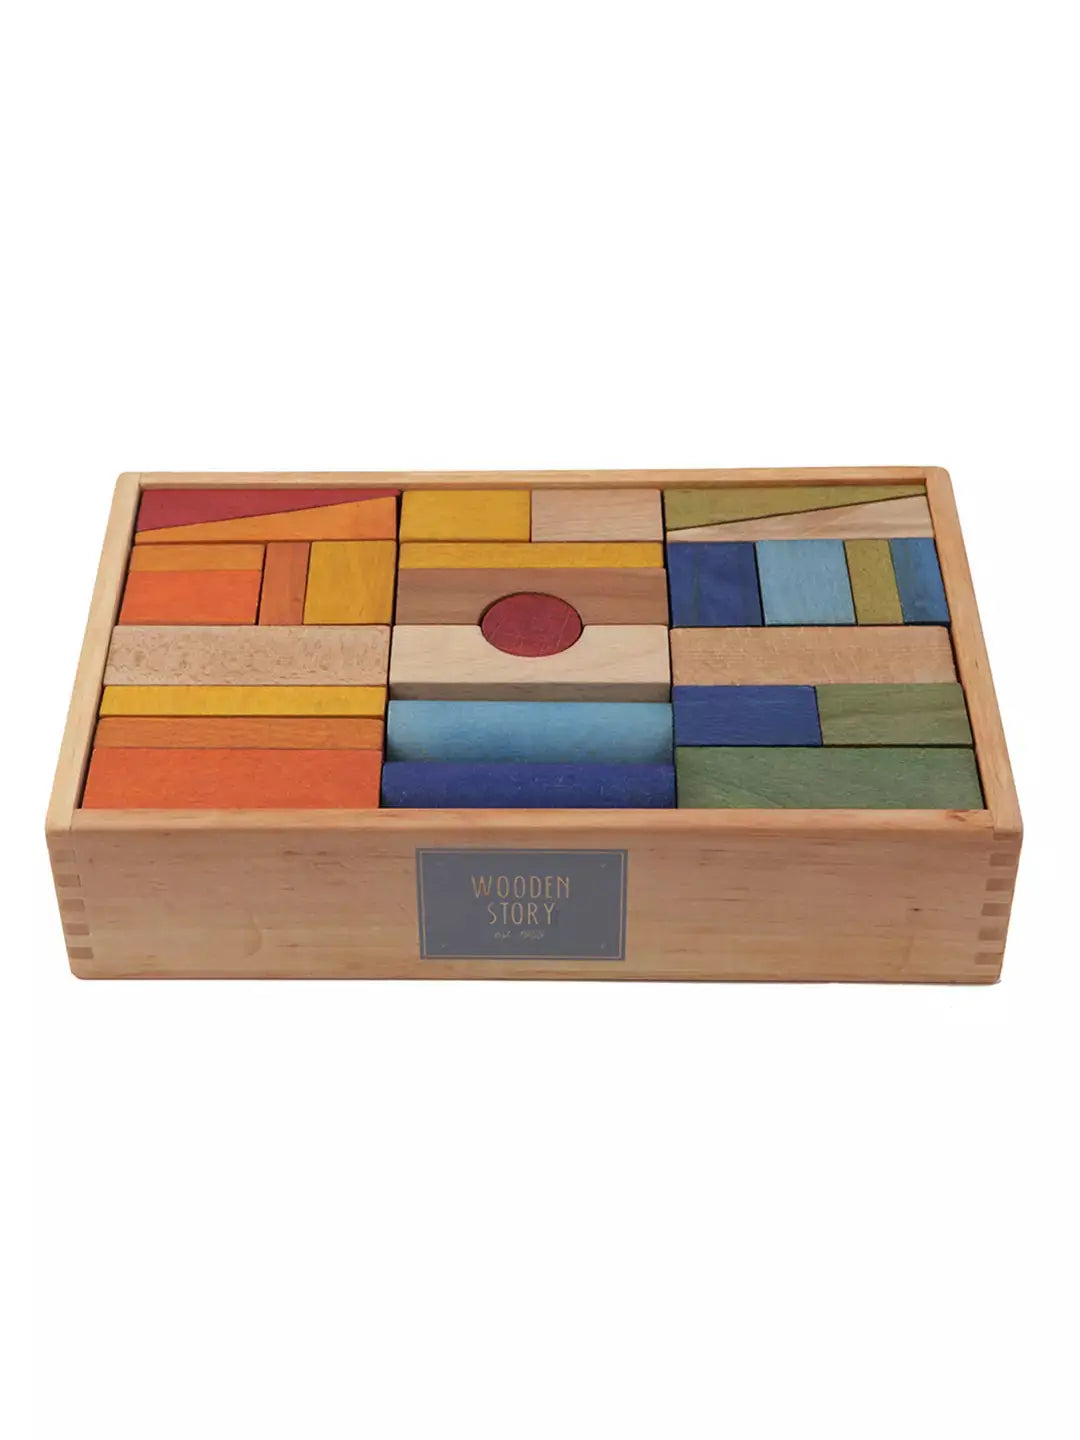 63 extra large pieces in a box made of solid wood that comes from FSC®certified suppliers. Colored with all natural, eco-certified paints and finished with beeswax and botanical oils, sanded perfectly smooth, soft to the touch. Packed in a paperboard box, which is designed to be reused or easily recycled. Free of harmful chemicals.&nbsp;